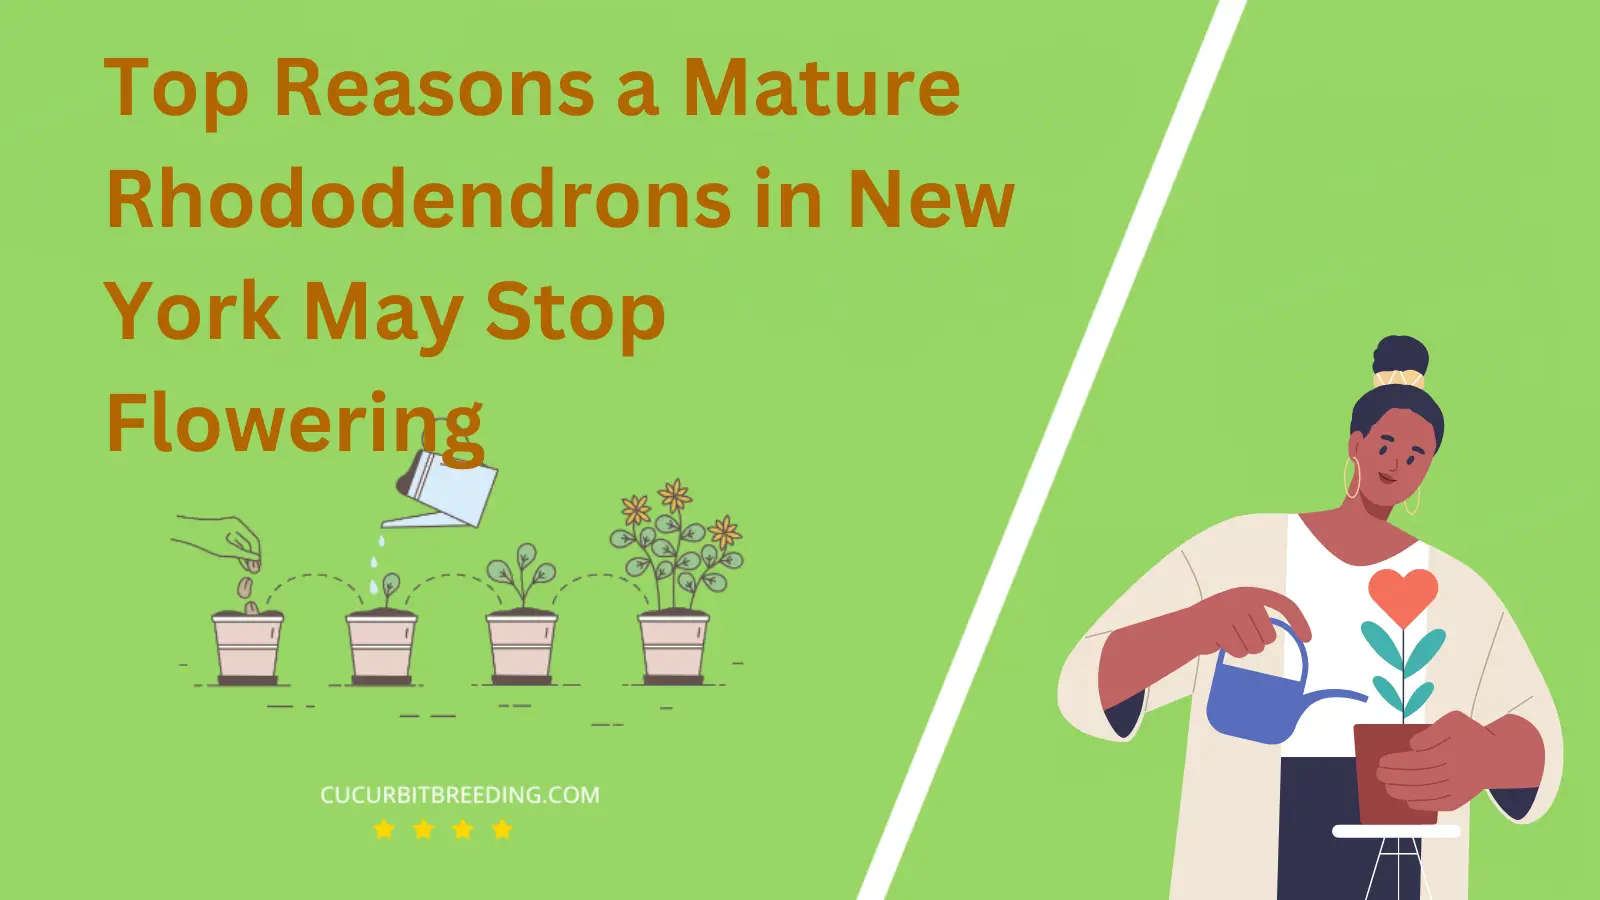 Top Reasons a Mature Rhododendrons in New York May Stop Flowering